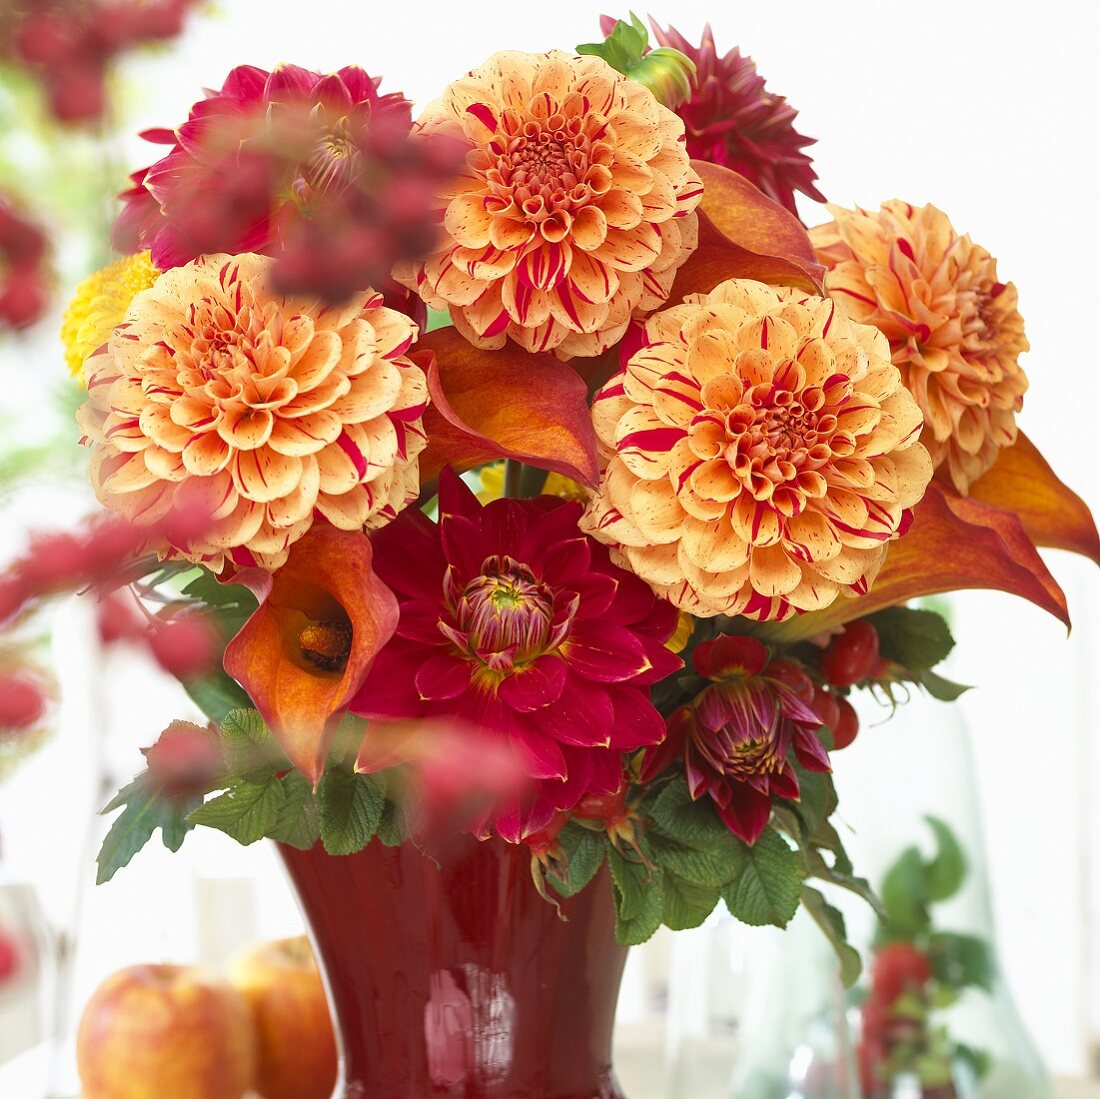 Vase of dahlias and other summer flowers